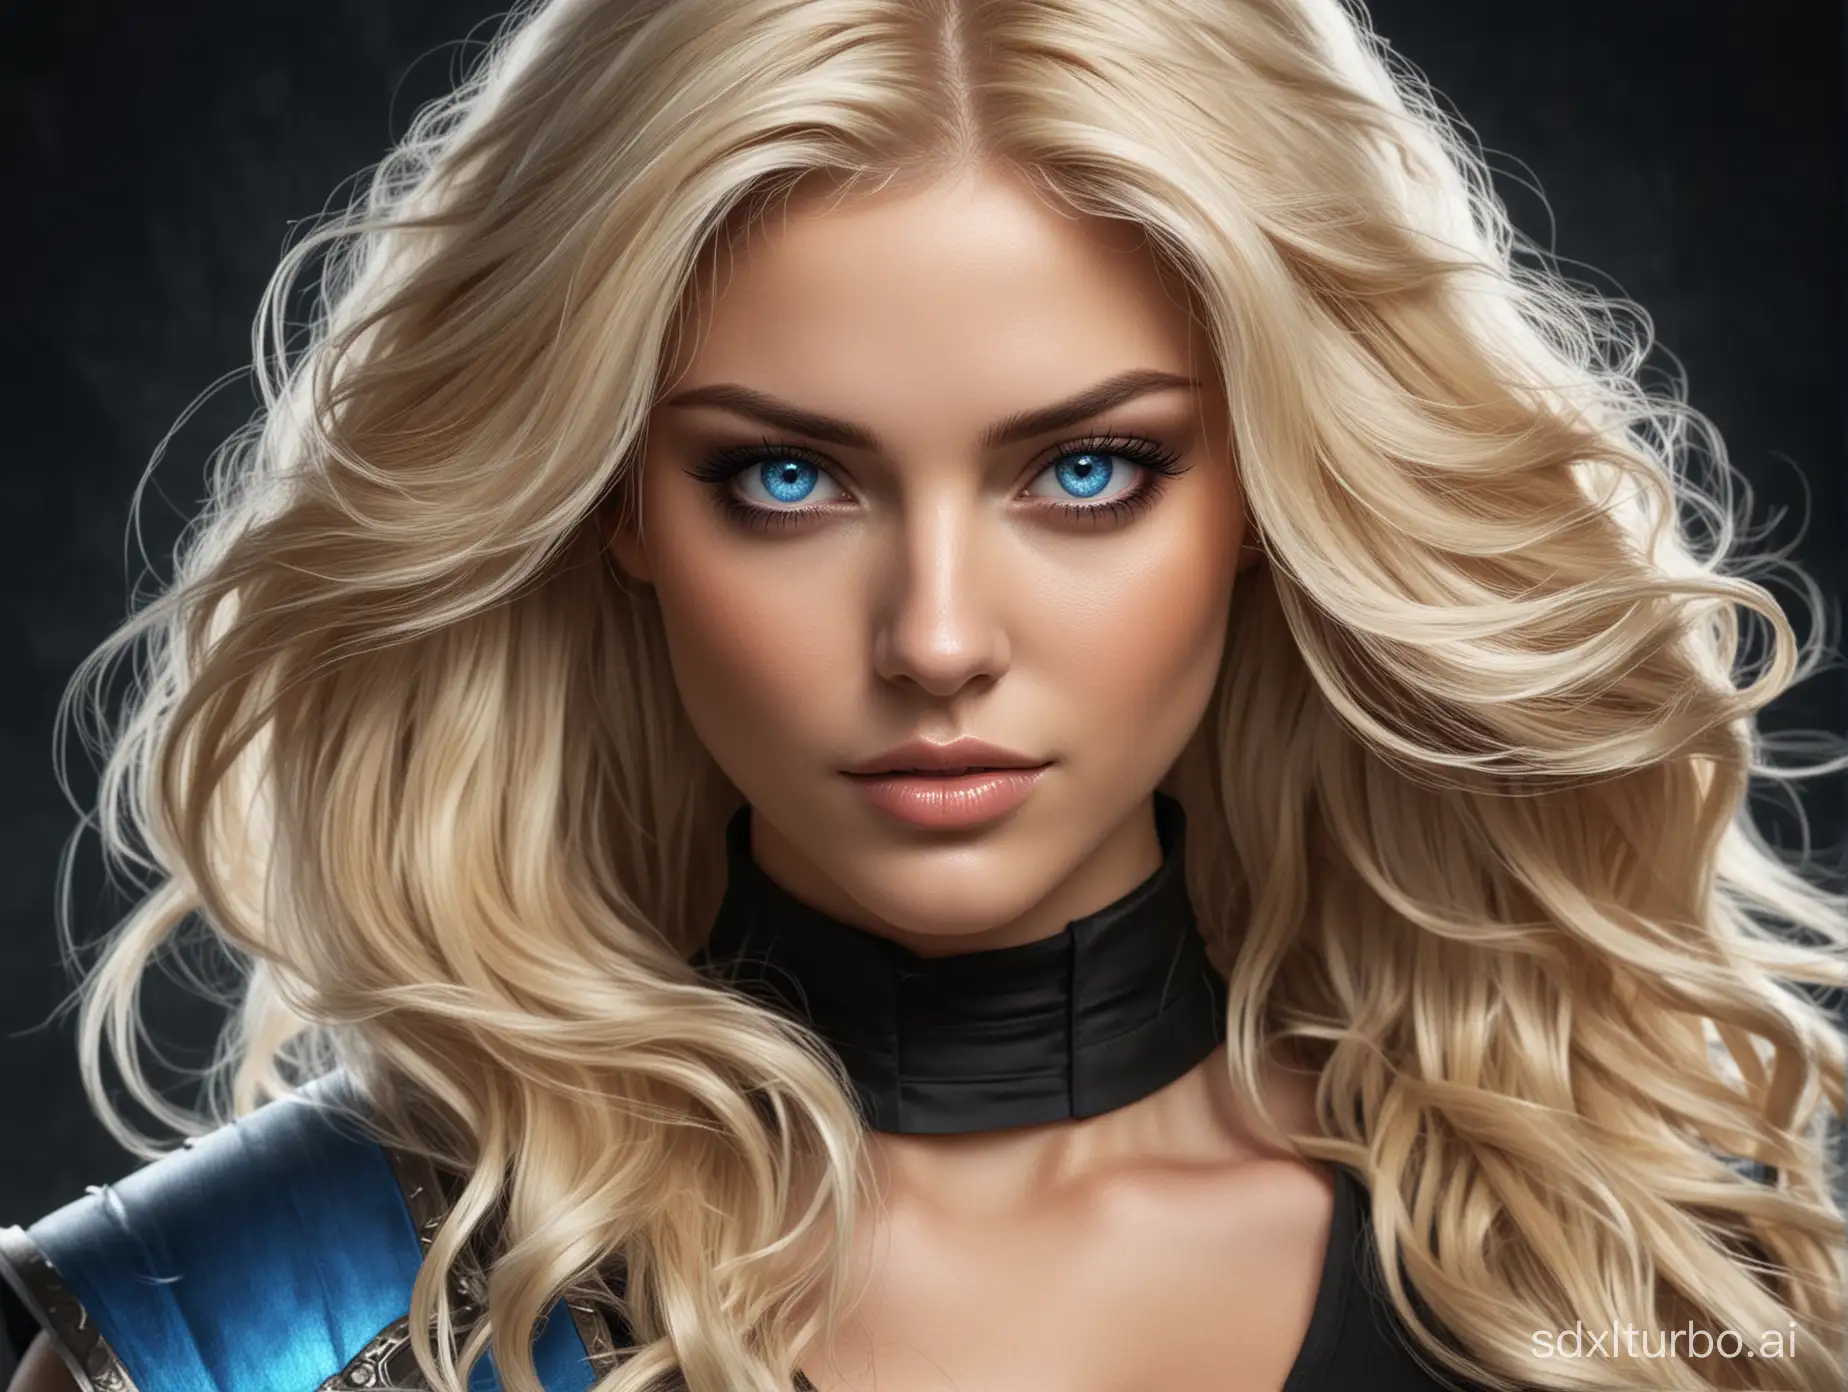 Fierce-Fighter-with-Long-Wavy-Blond-Hair-and-Blue-Eyes-in-Mortal-Kombat-Style